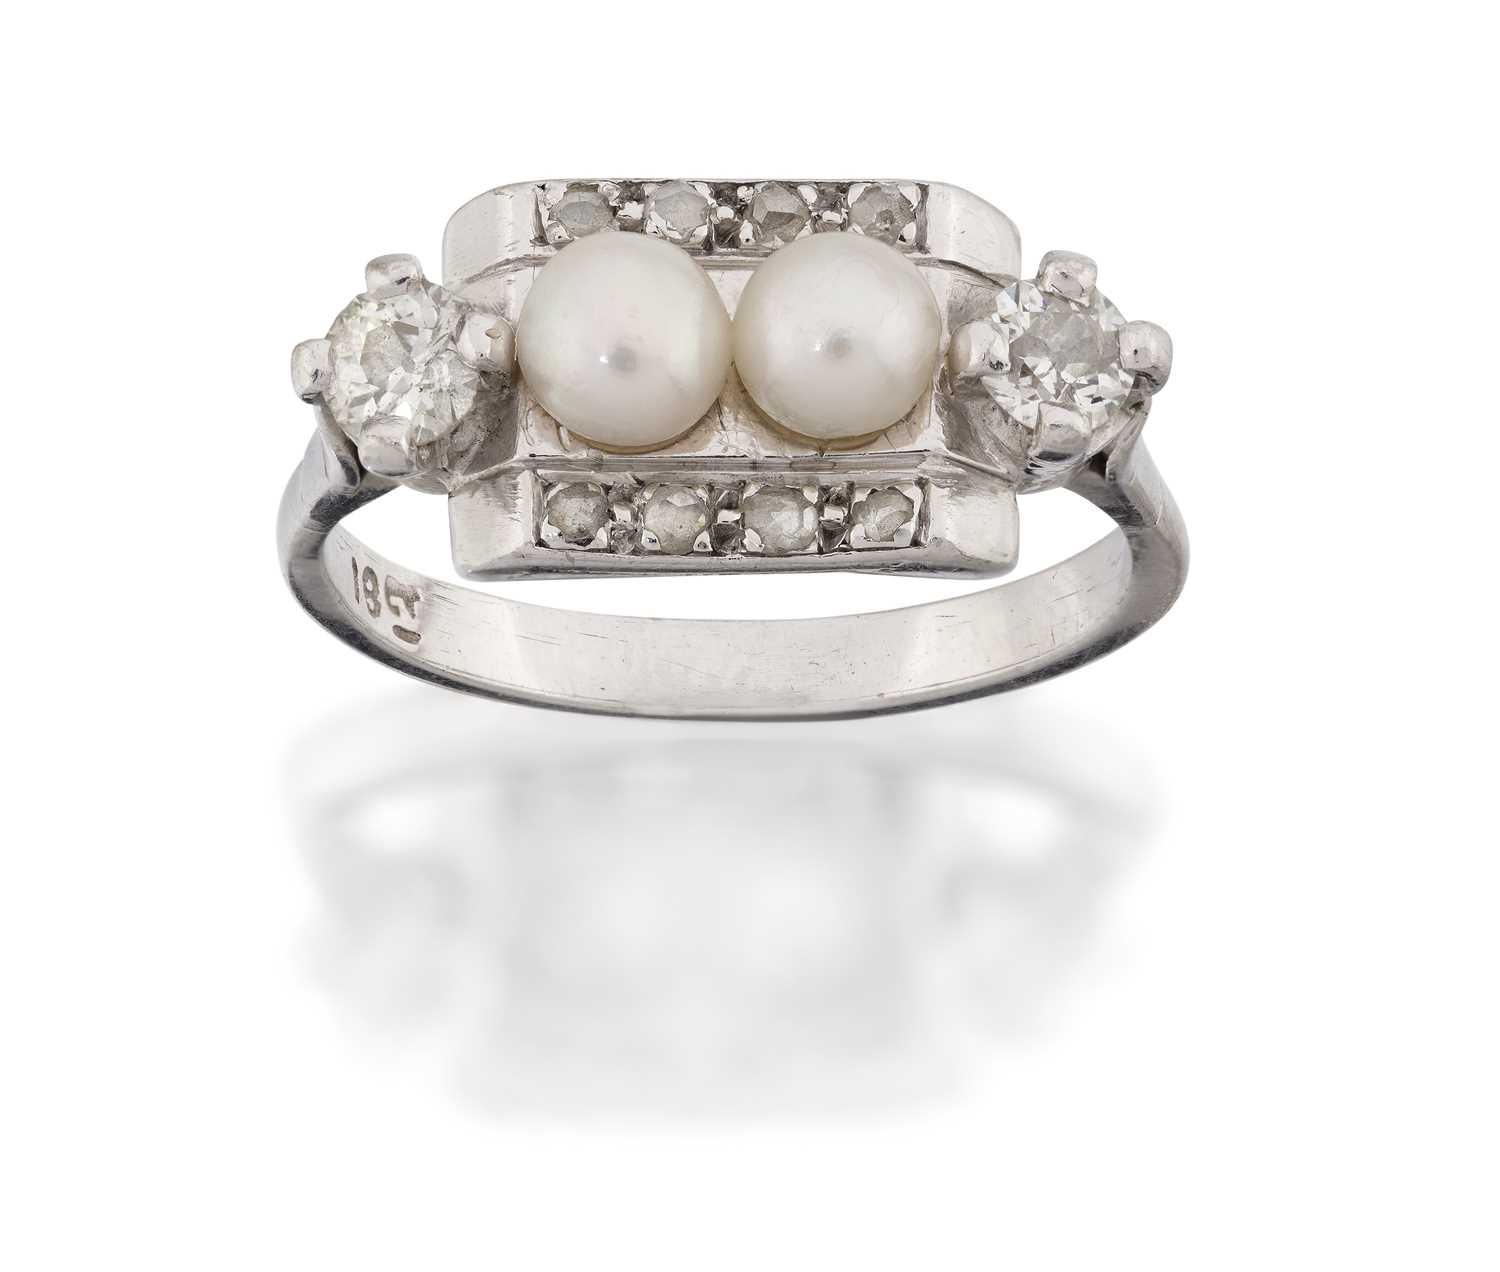 Lot 2035 - A Cultured Pearl and Diamond Ring